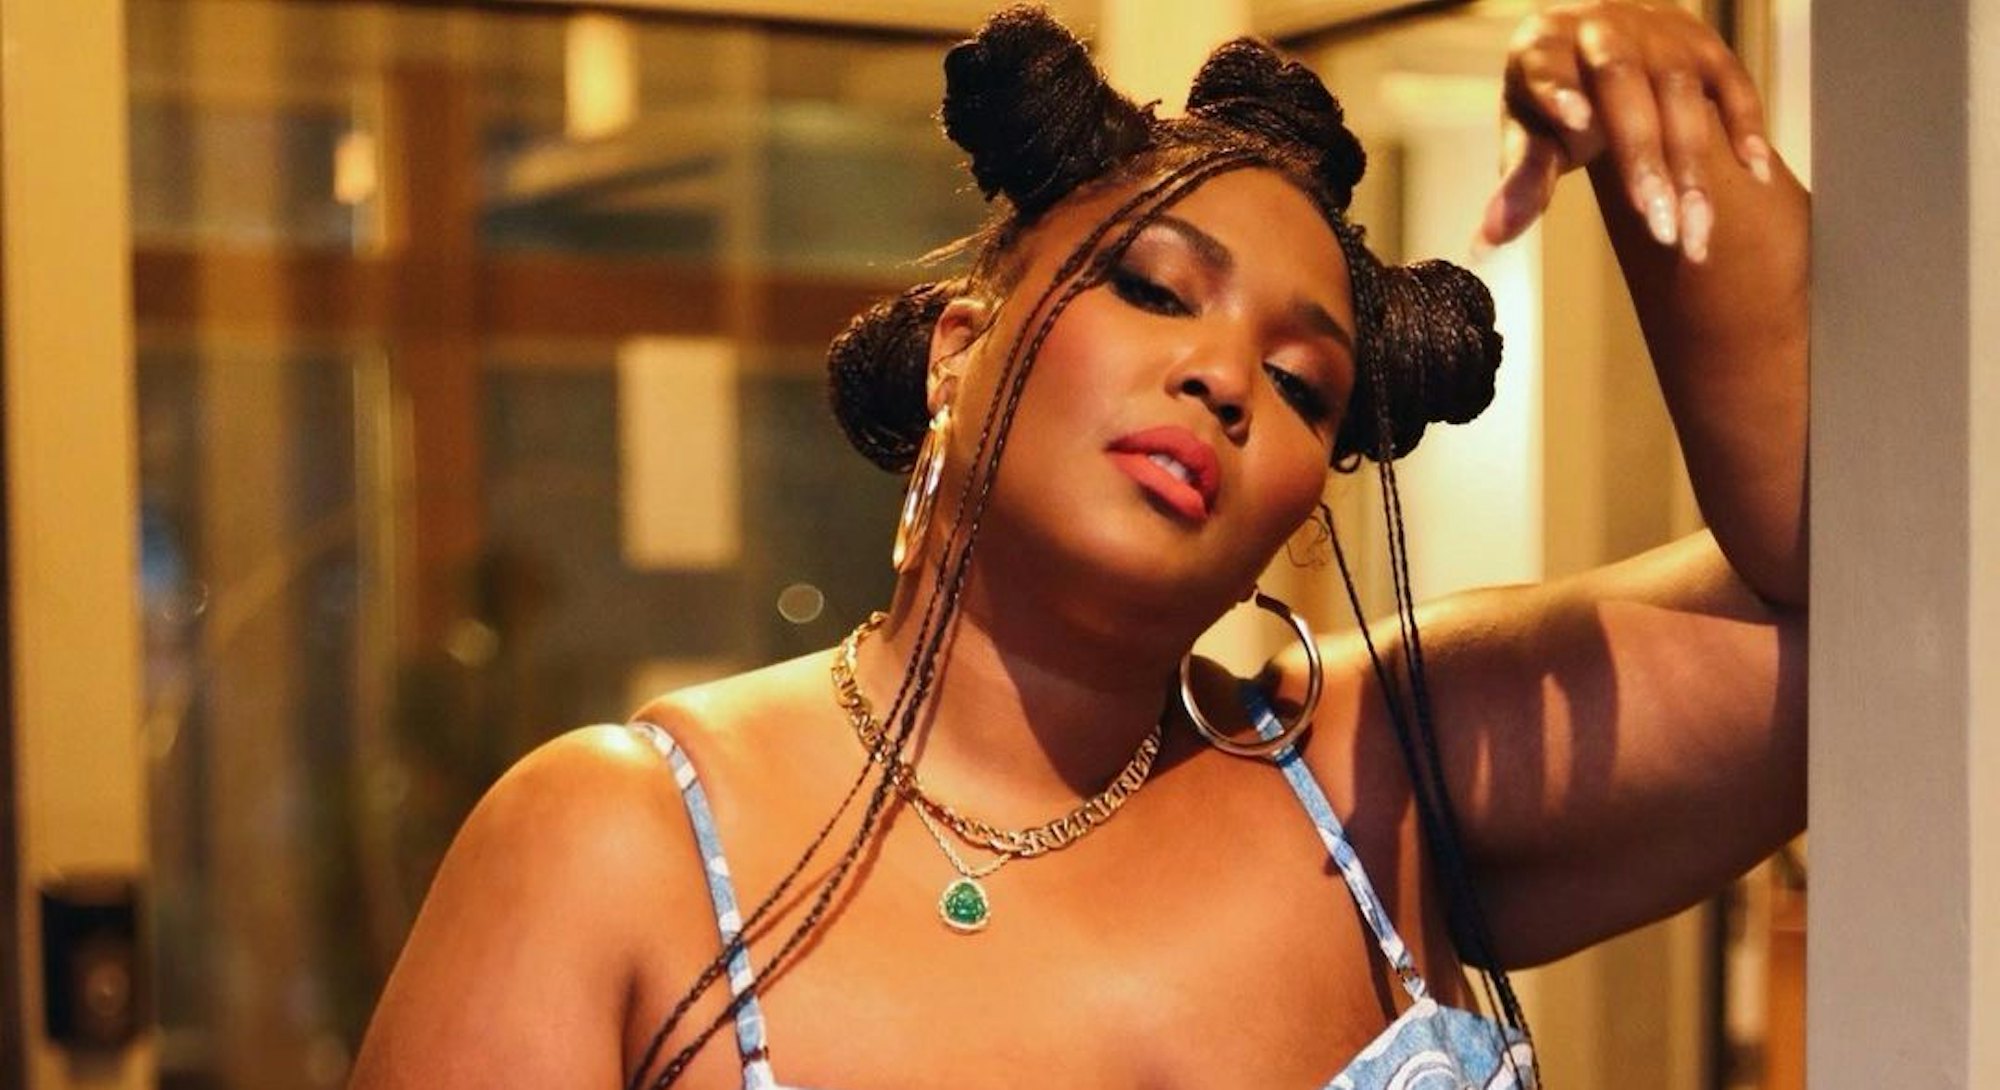 Lizzo is one of the Best Dressed Celebrities this week. Here, she rocks a matching crop top and skir...